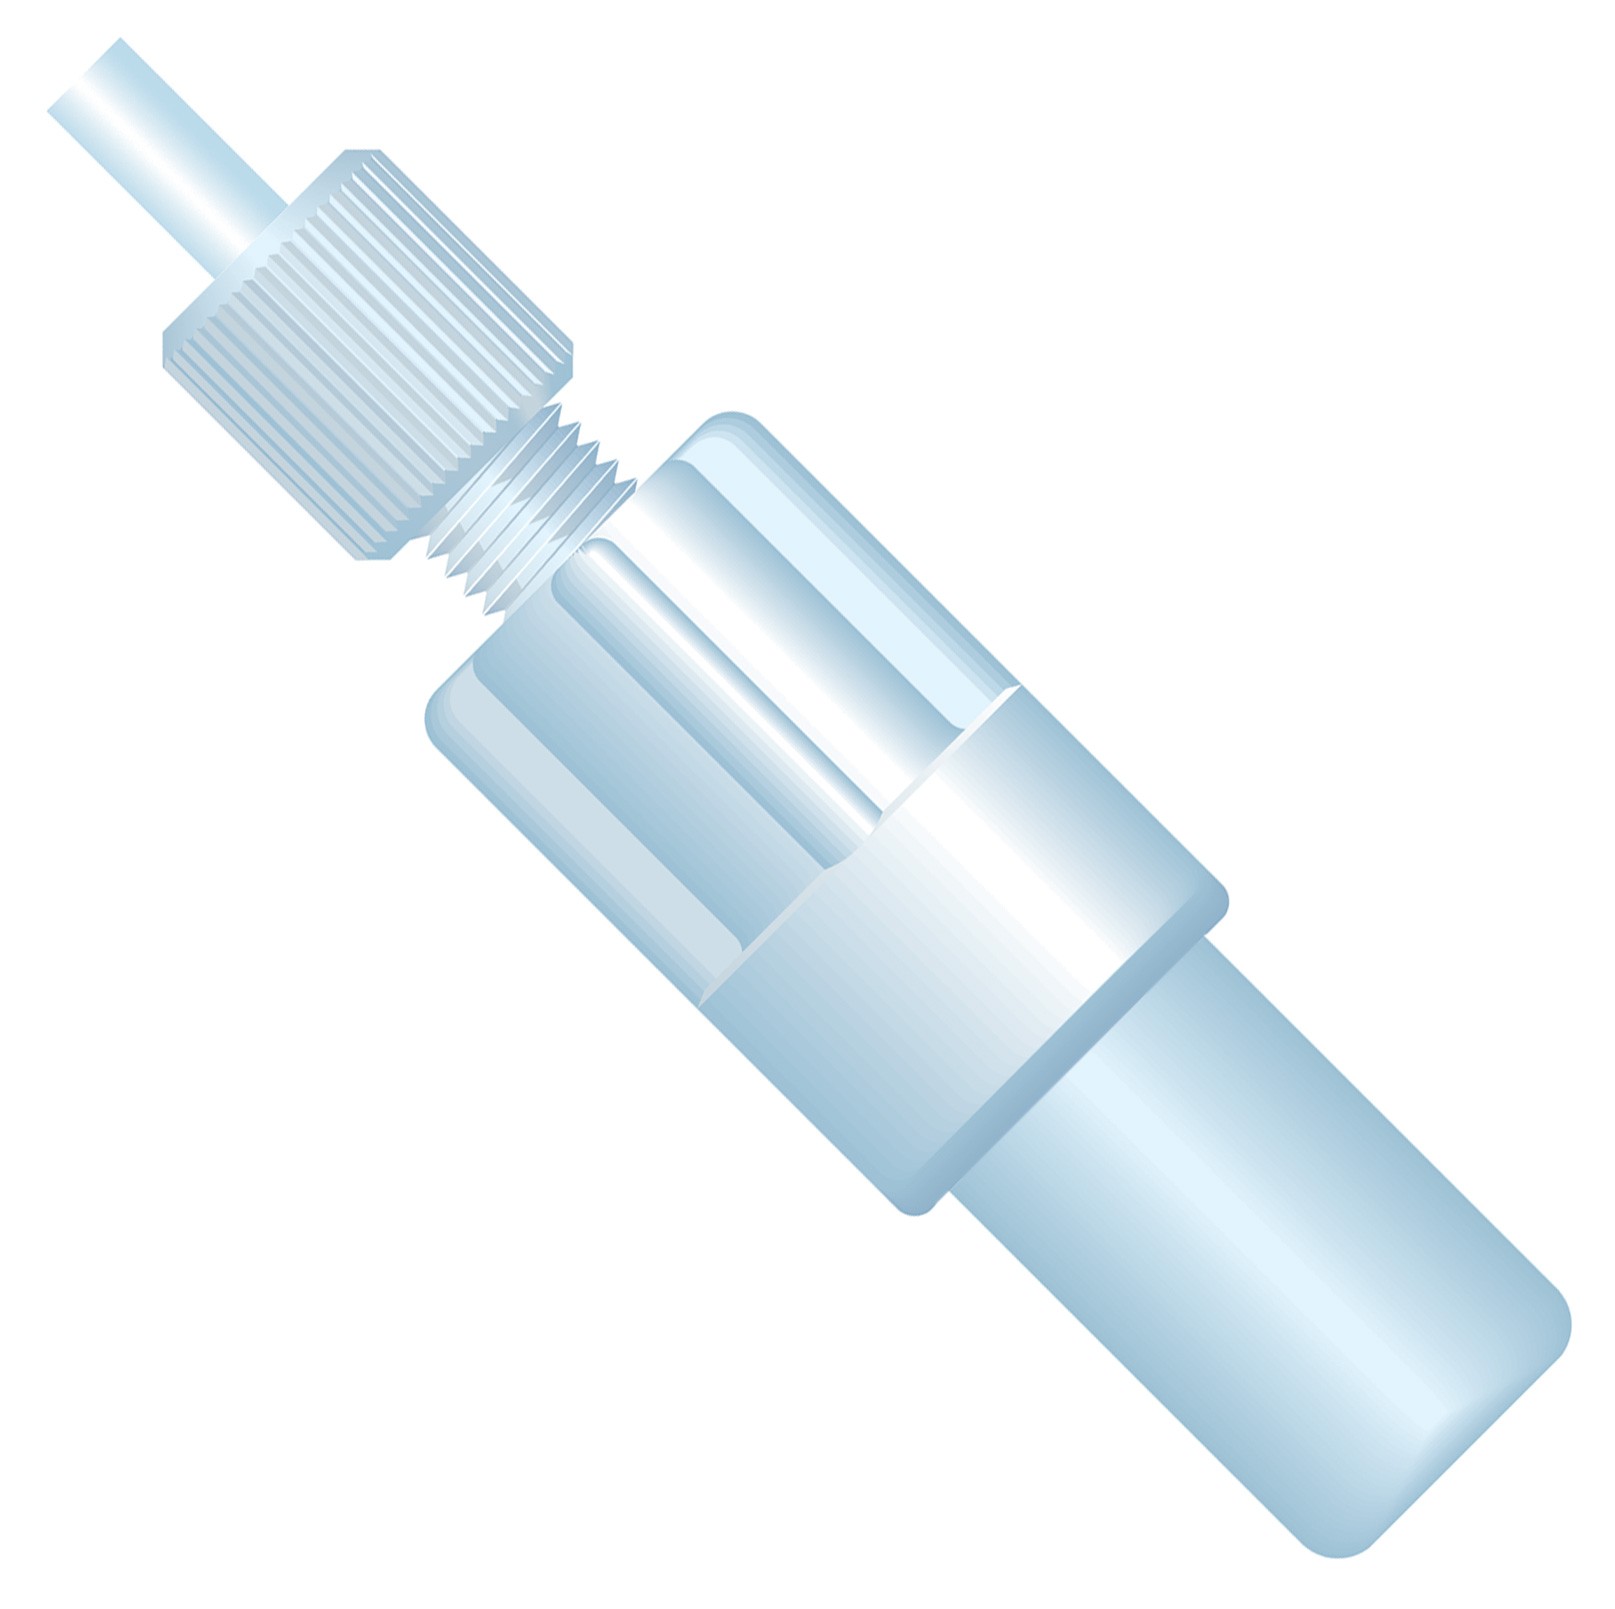 Filters & Frits: Inlet Solvent Filter Assy. (BOB), 10Âµm, 1/8" OD Tubing, UHMWPE, ETFE (incl. (1) XP-345)